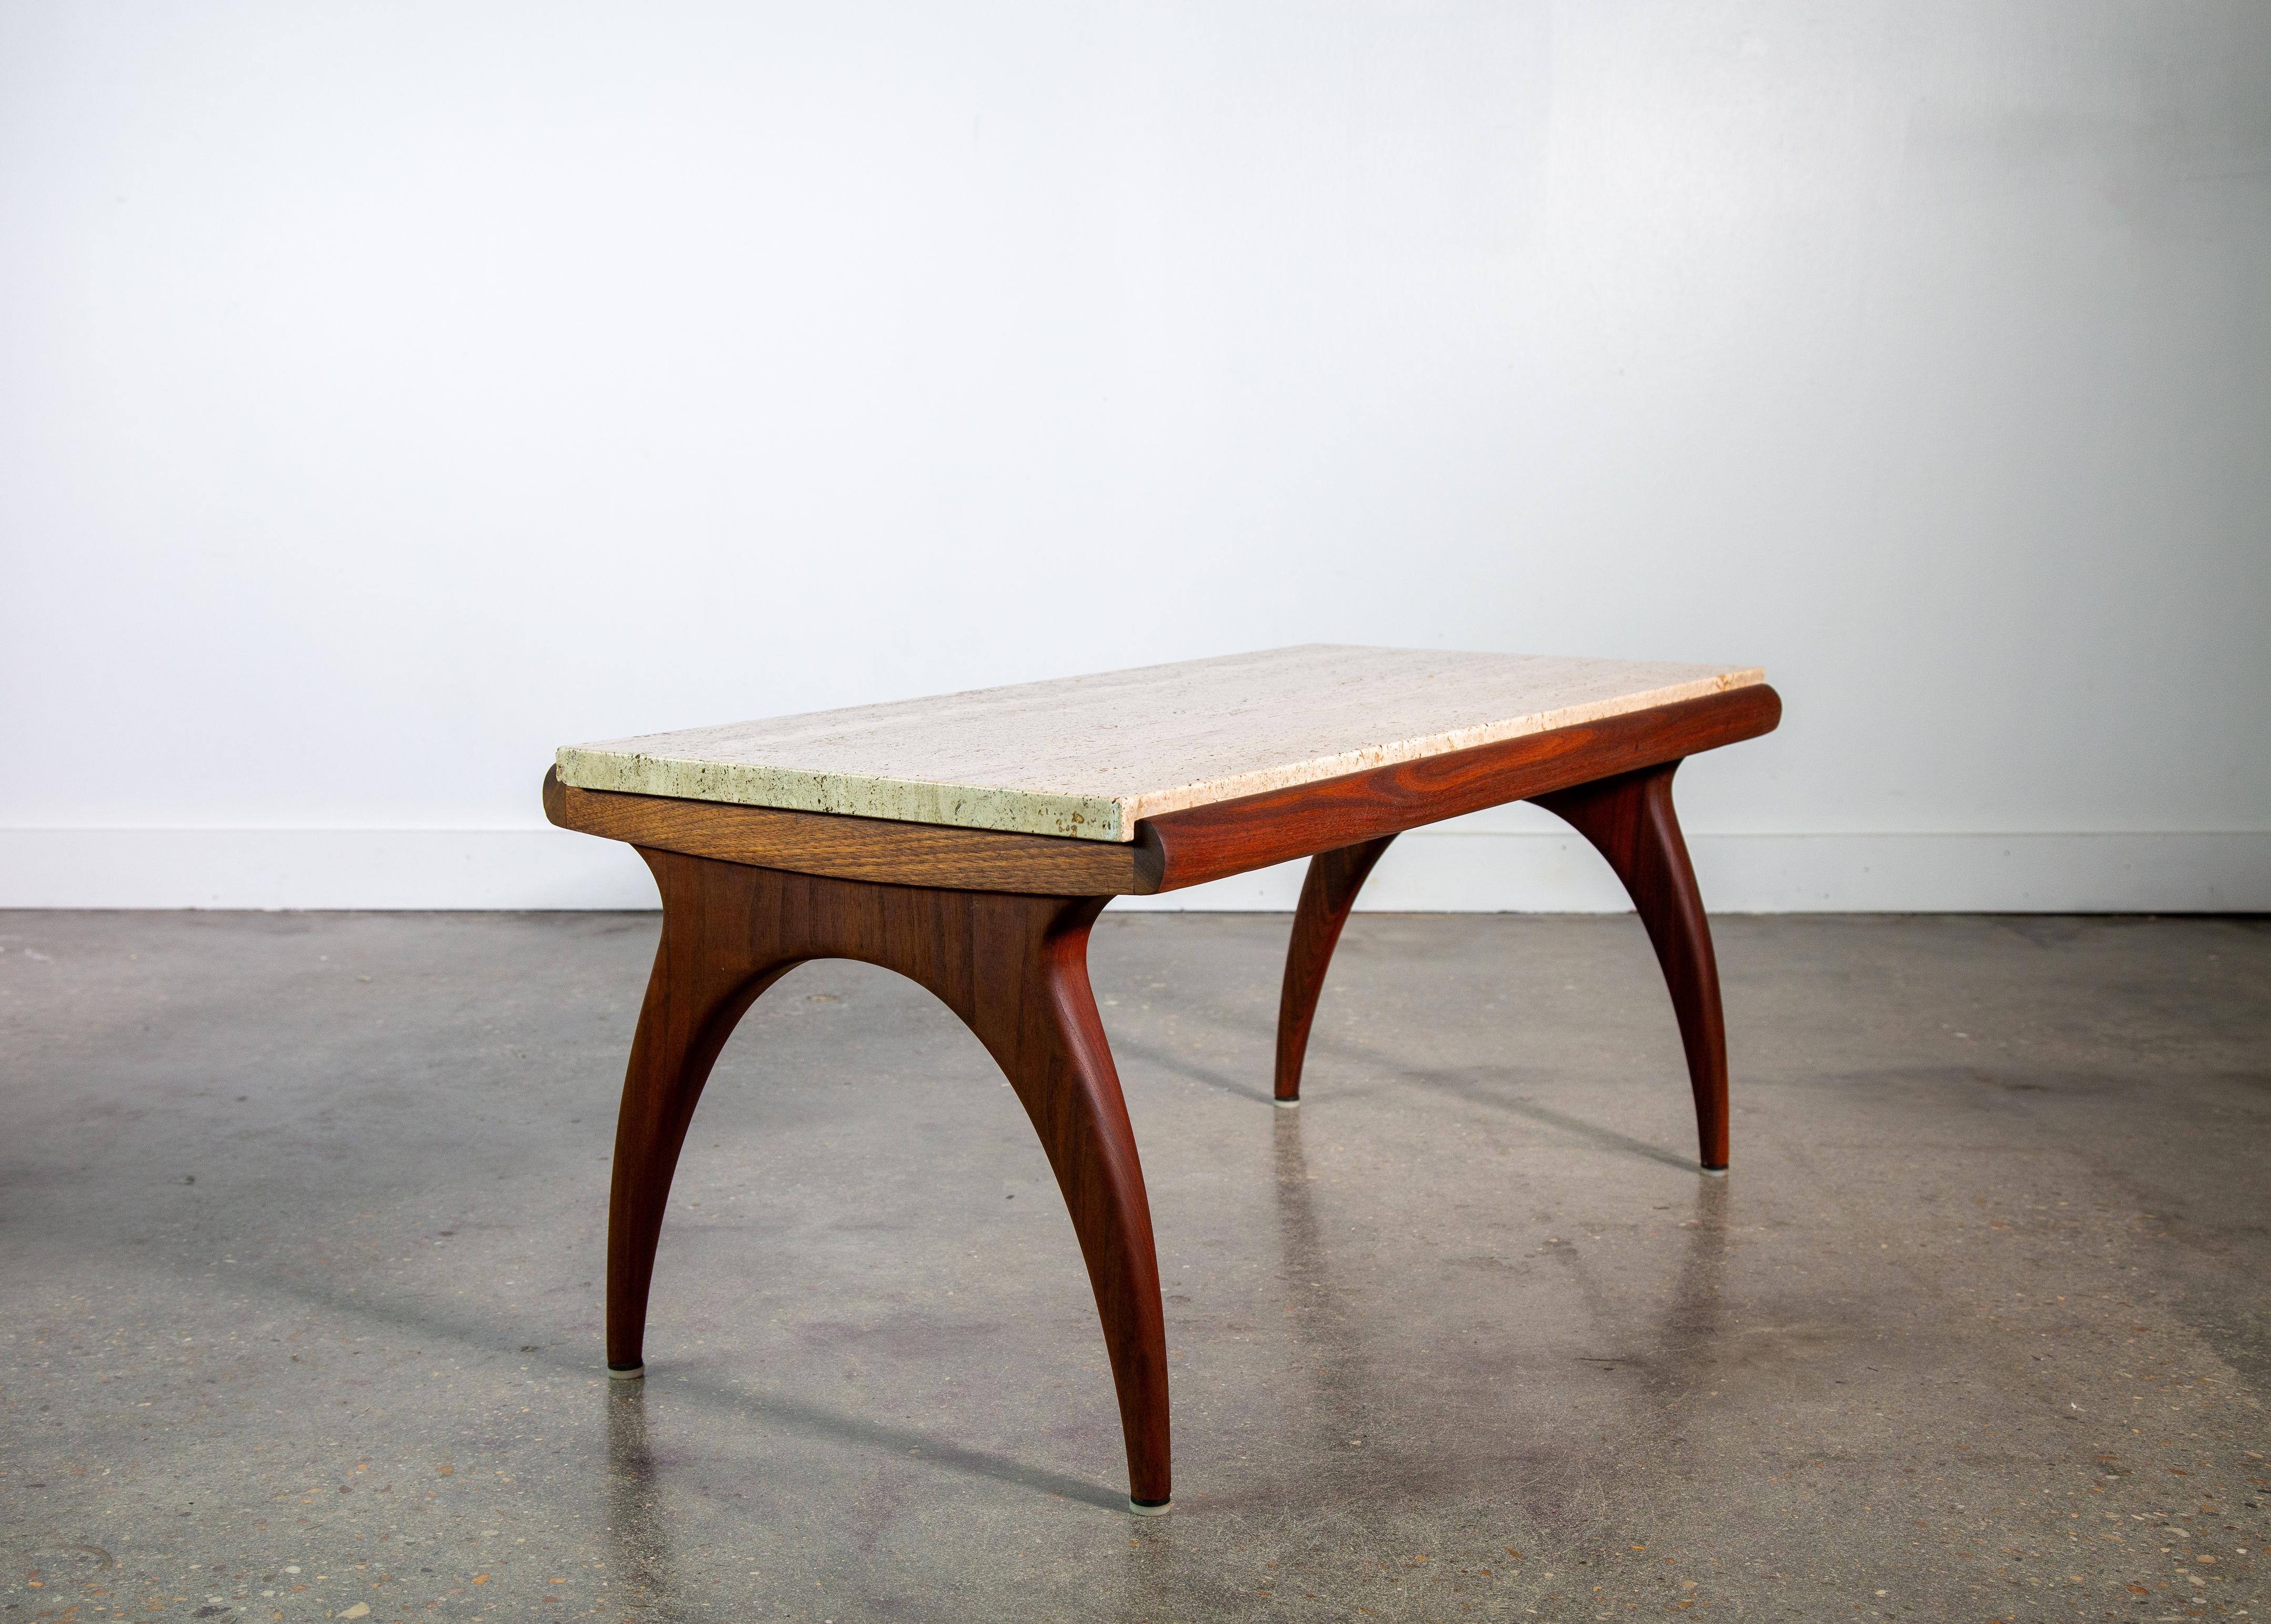 1950s Bertha Schaefer for M. Singer Sons Walnut and Travertine Coffee Table For Sale 5